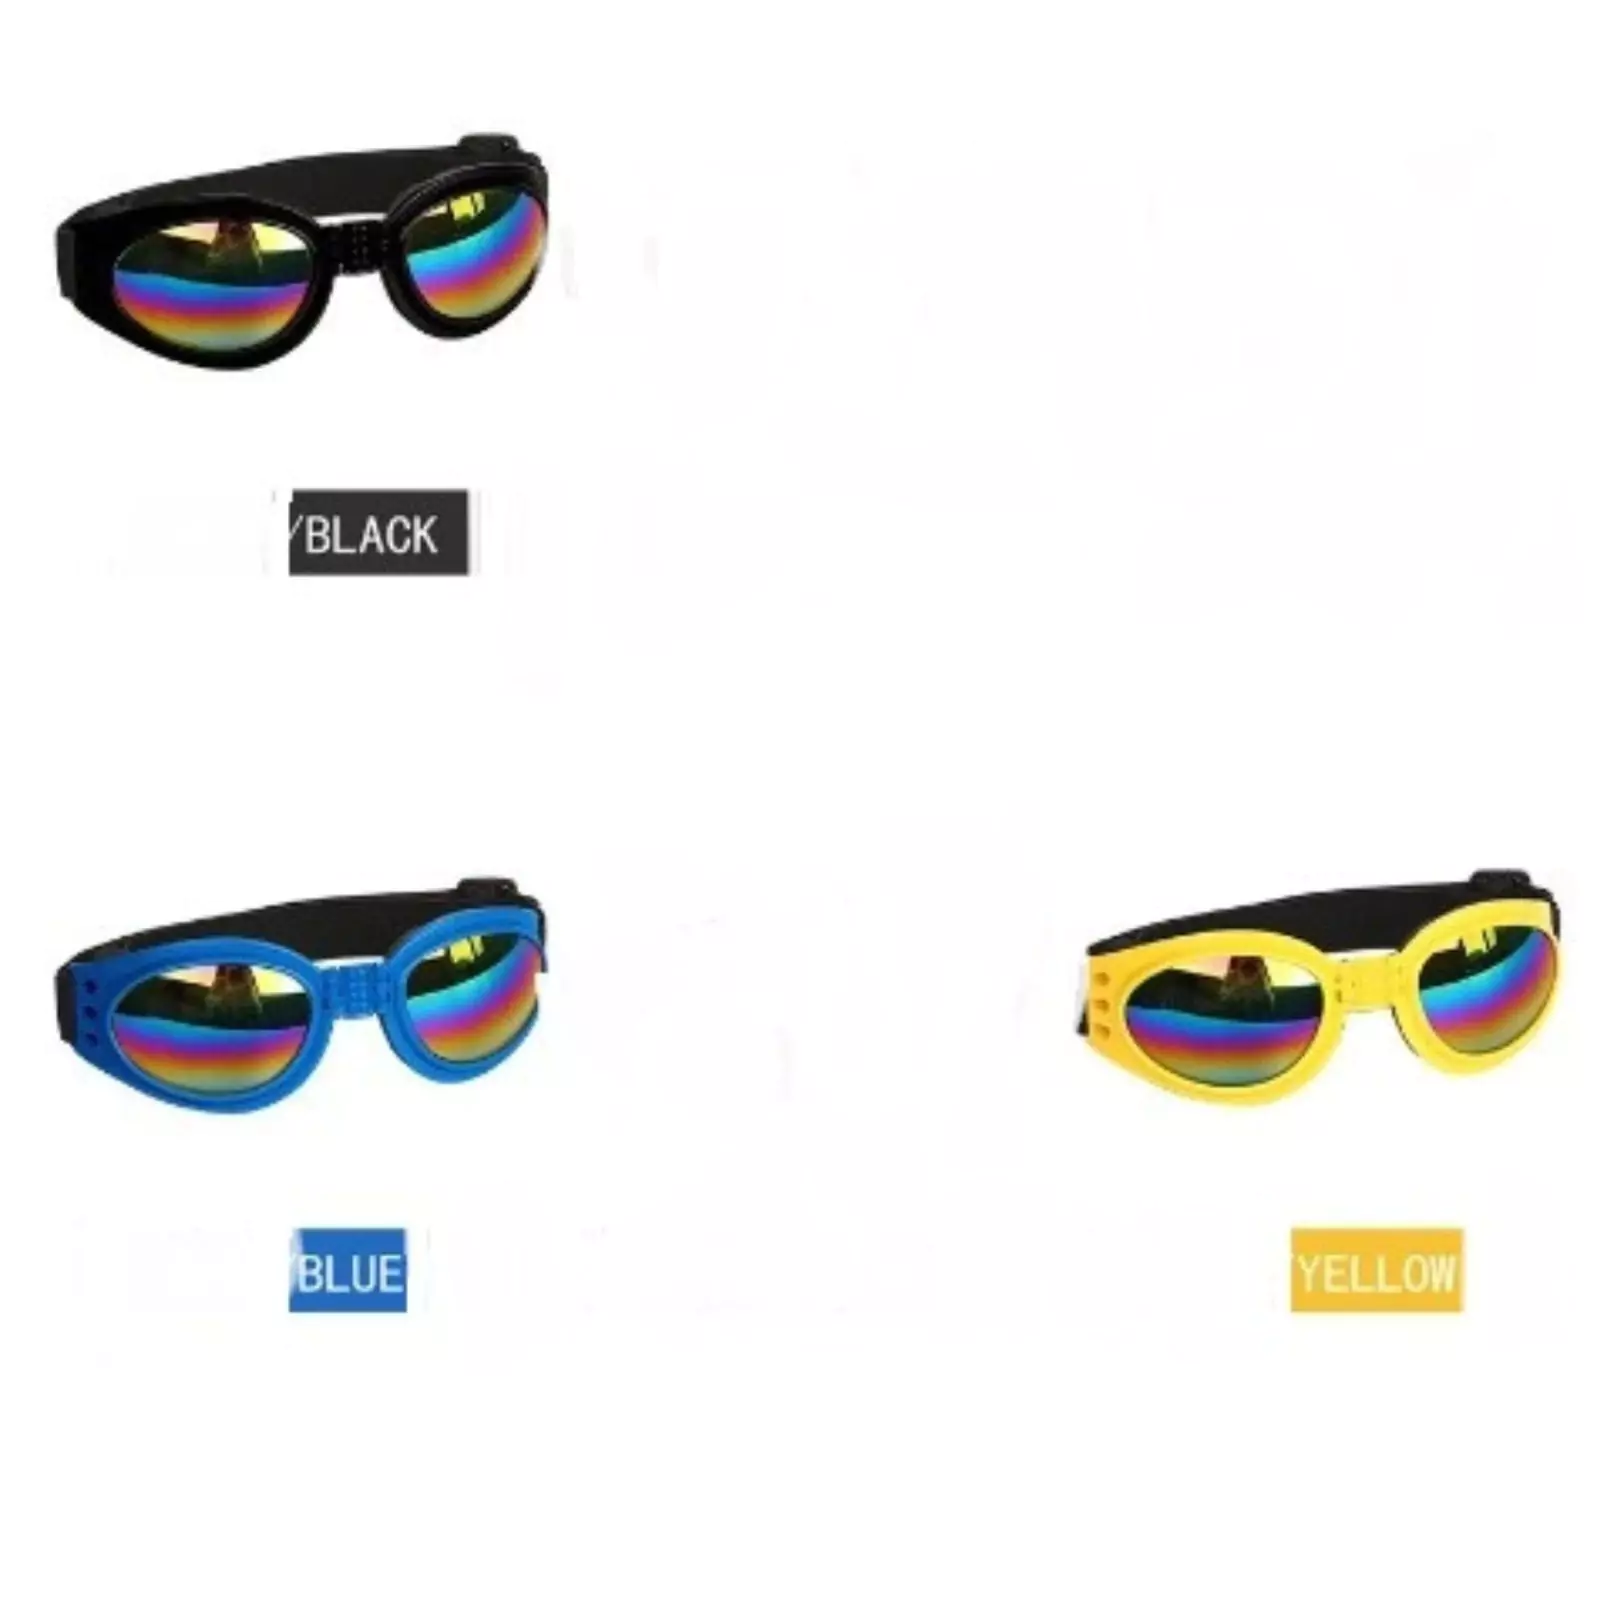 Shady Paws Doggy Sunglasses in Cool Black, Blue, and Yellow1